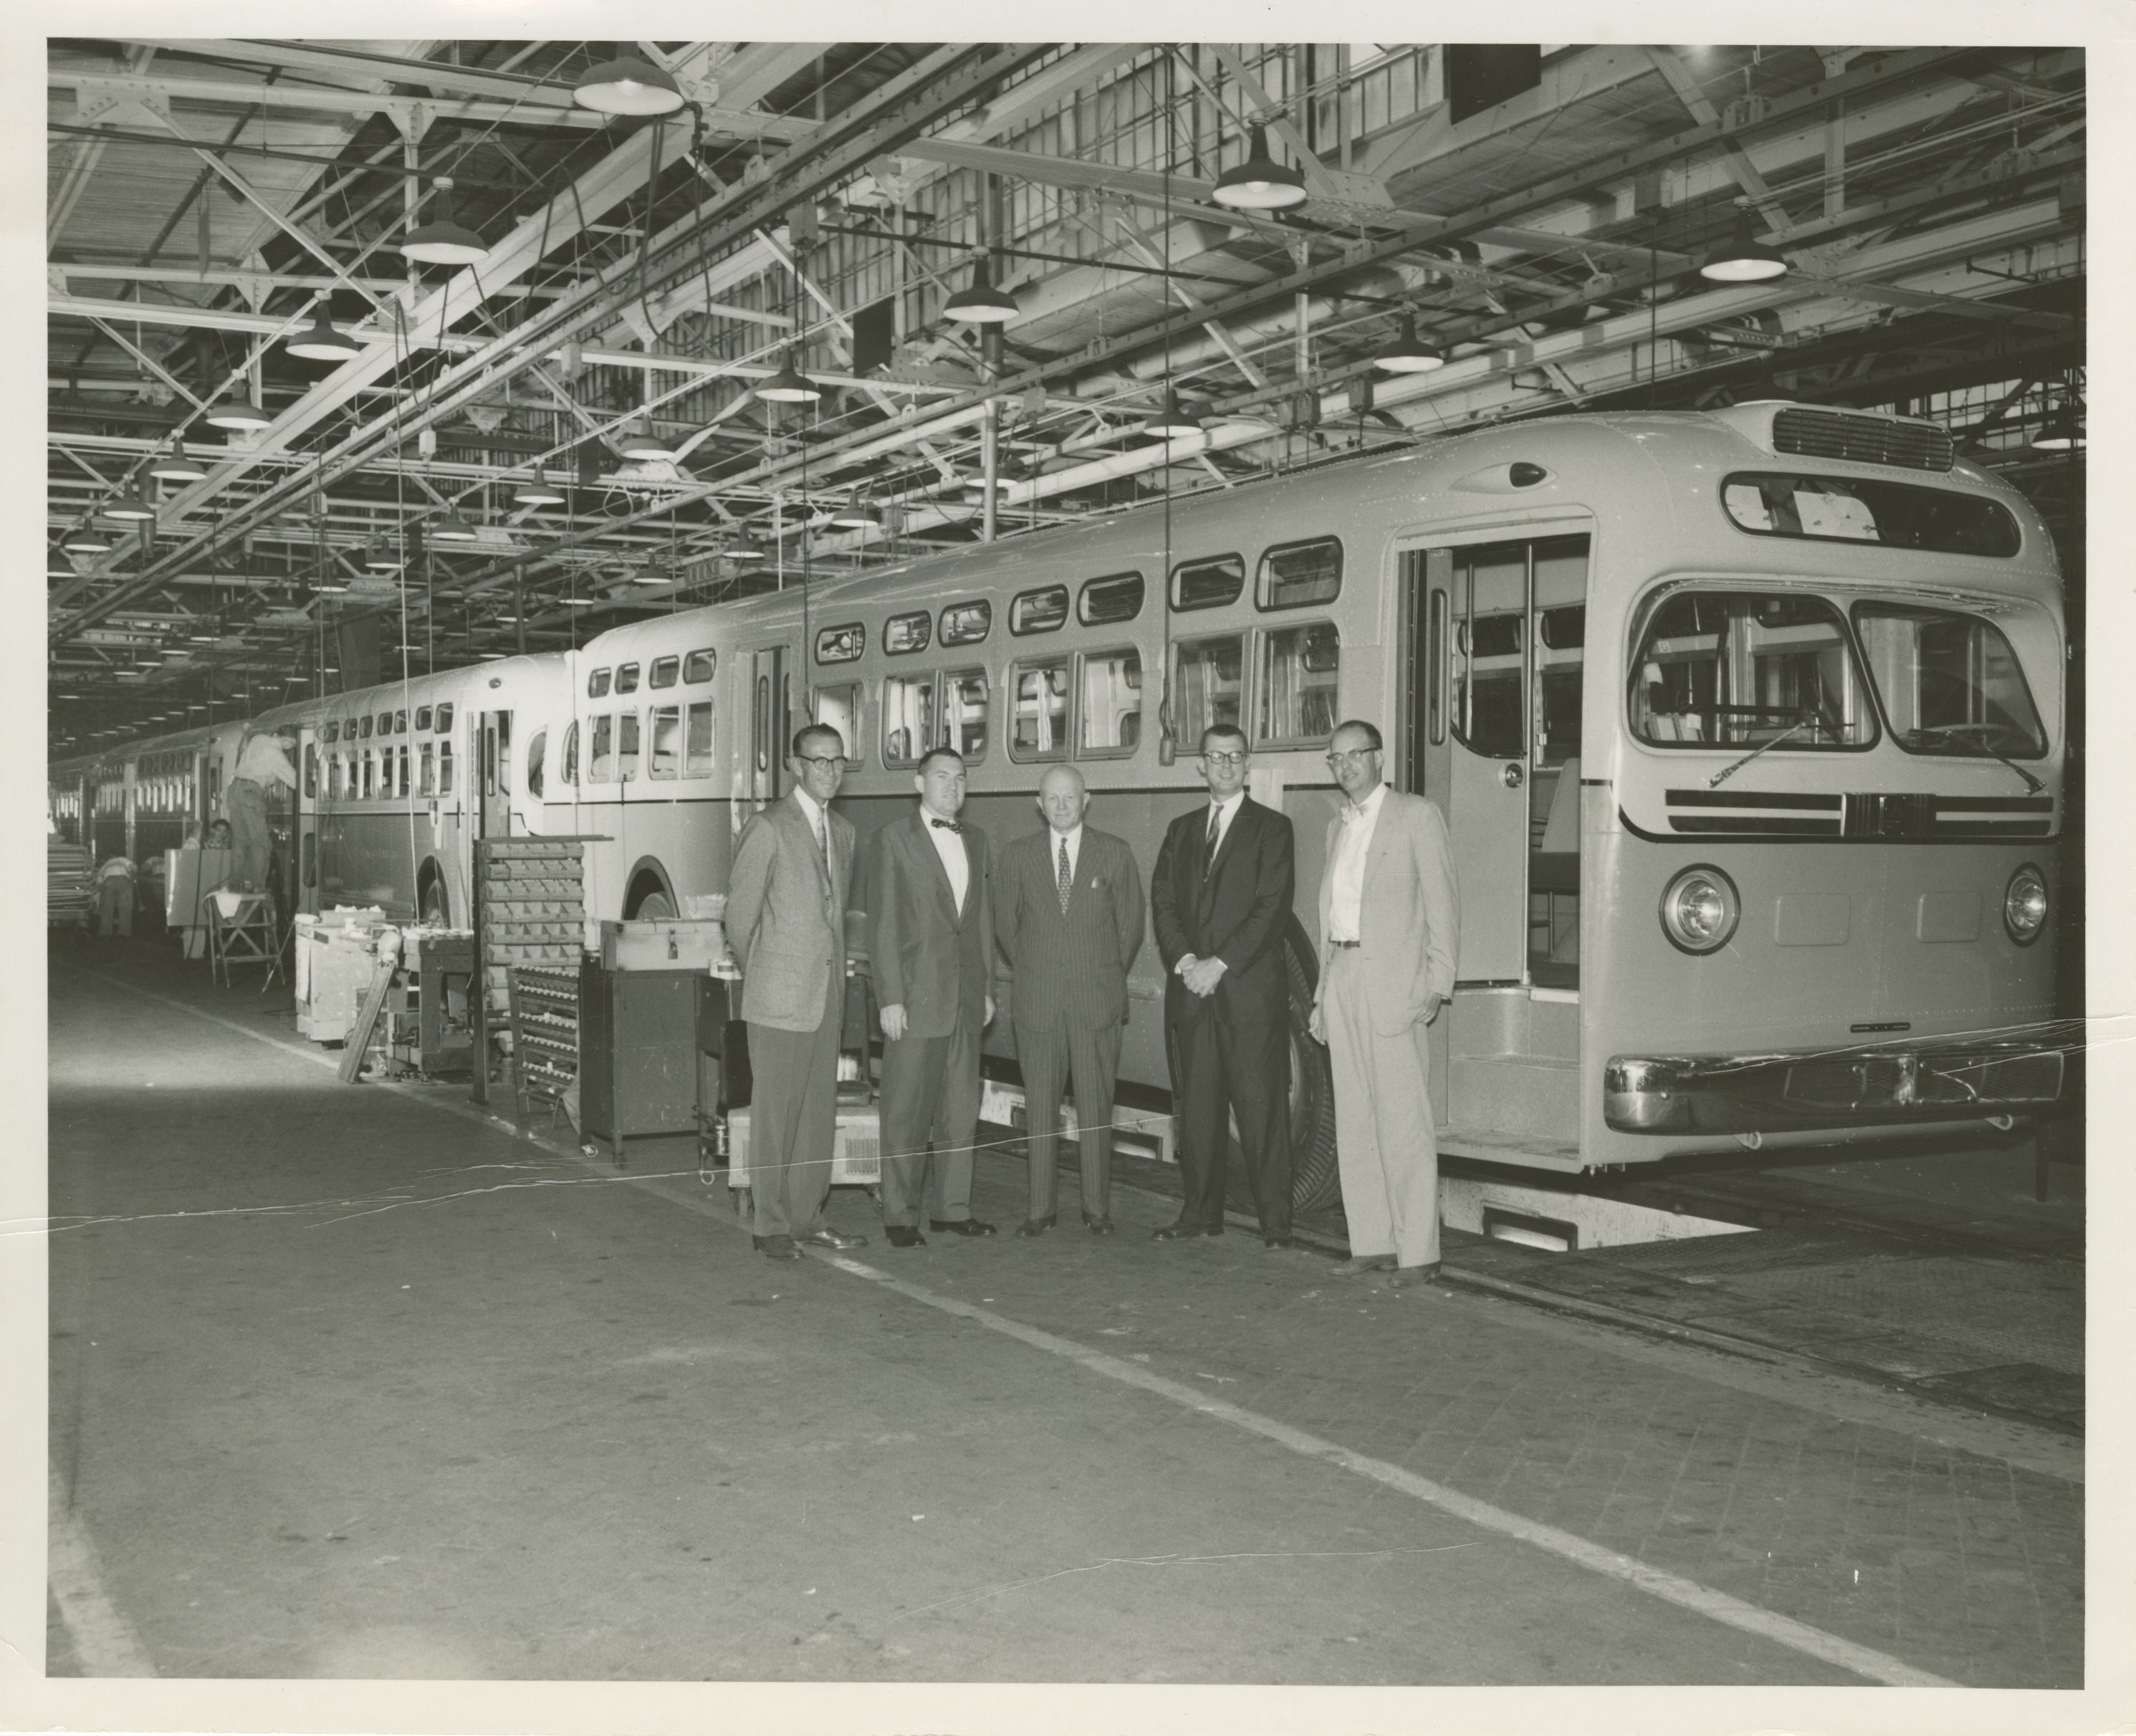 A black and white photo of Gettler with colleagues at a bus manufacturing facility, circa 1950s.